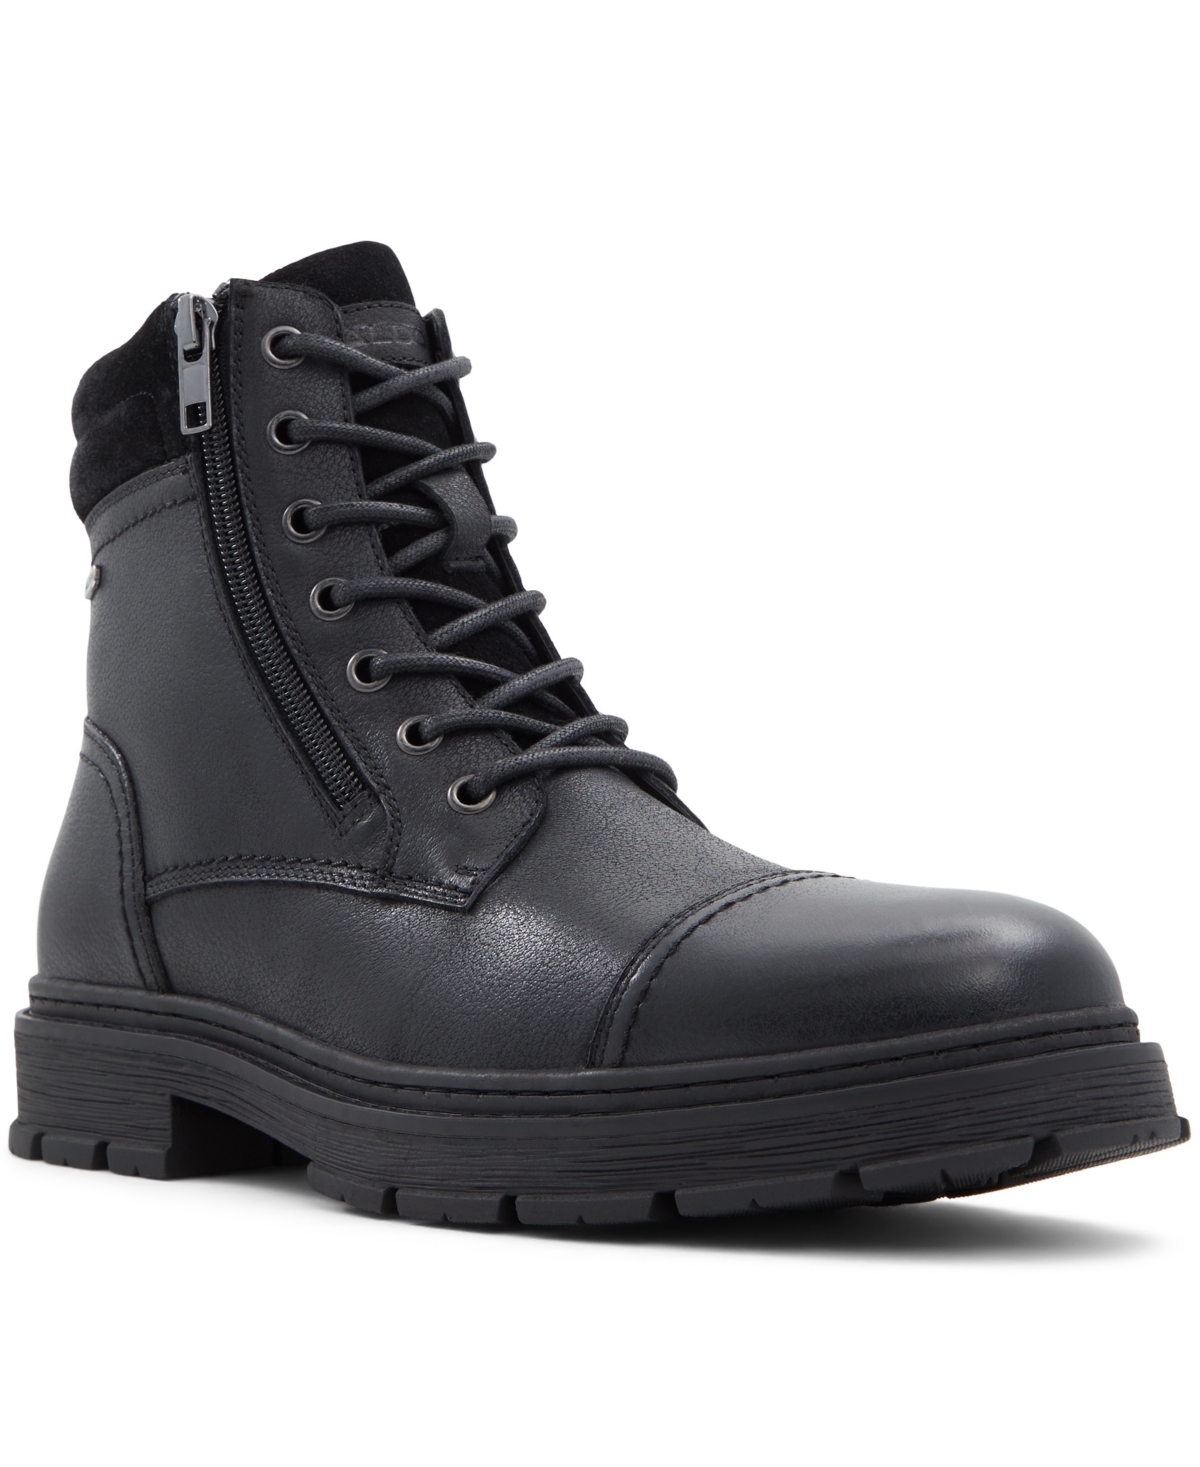 Men's Atwood Lace Up Boots - Other Black